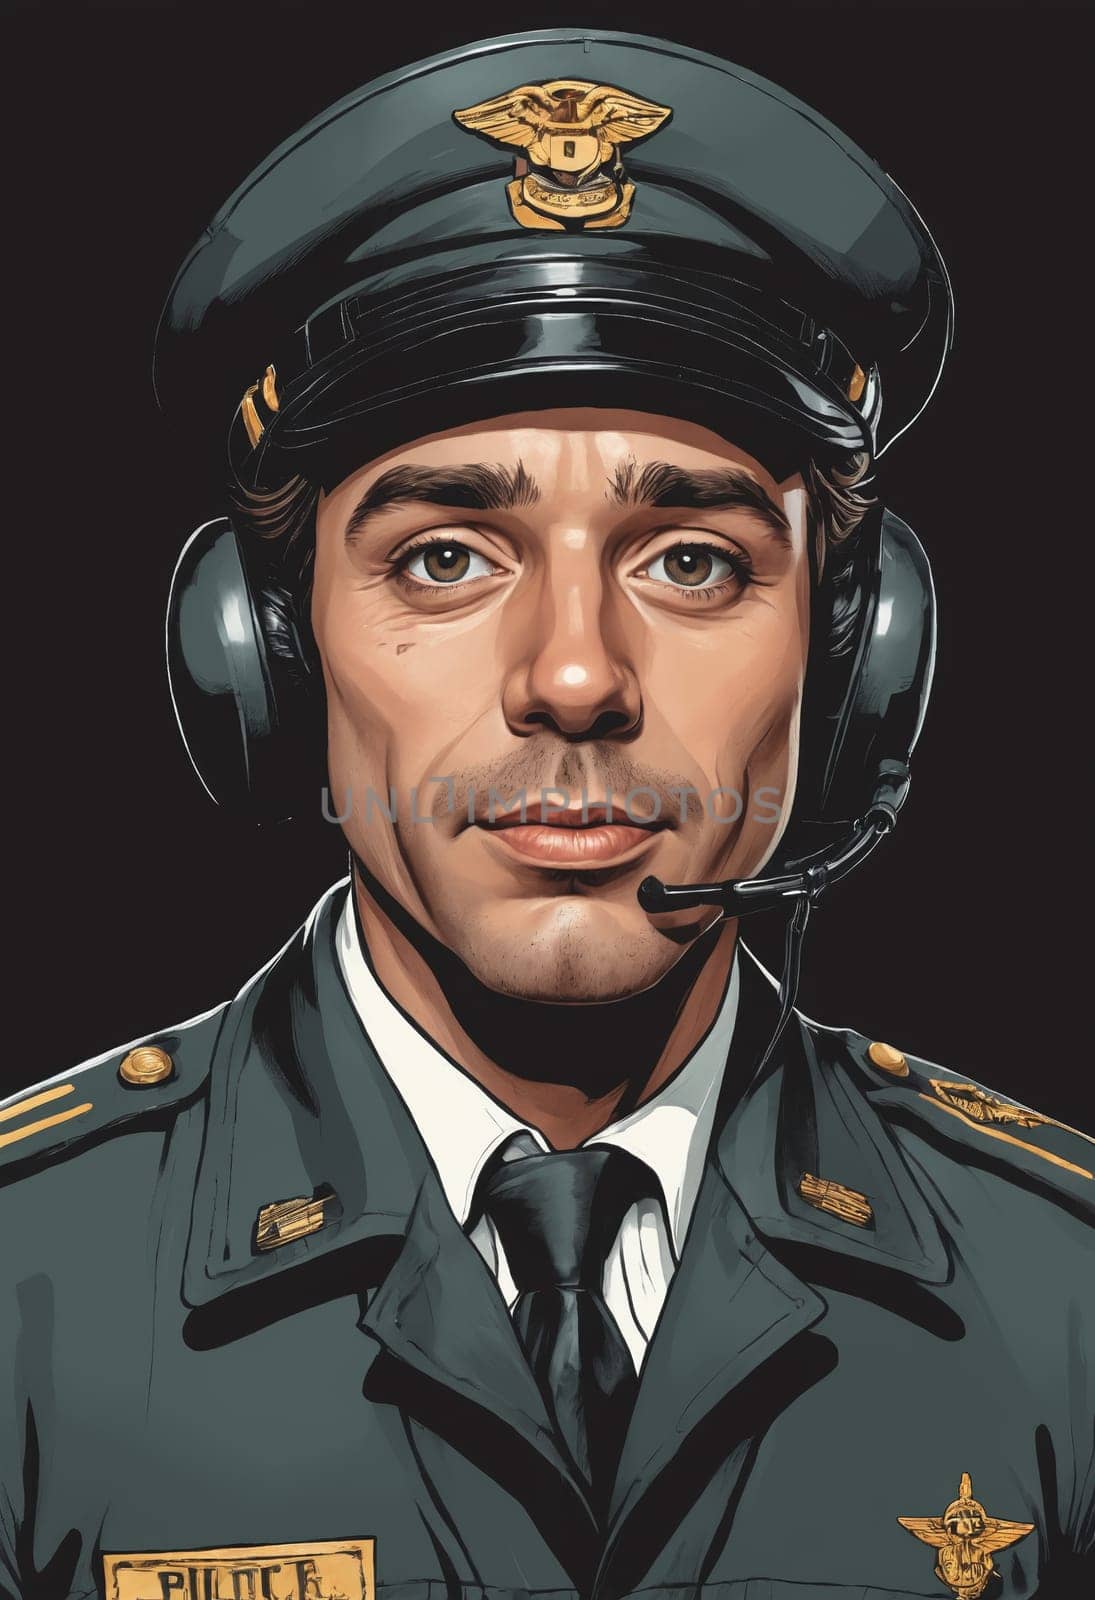 Professional pilot's portrayal, complete with aviation headphones and badge.